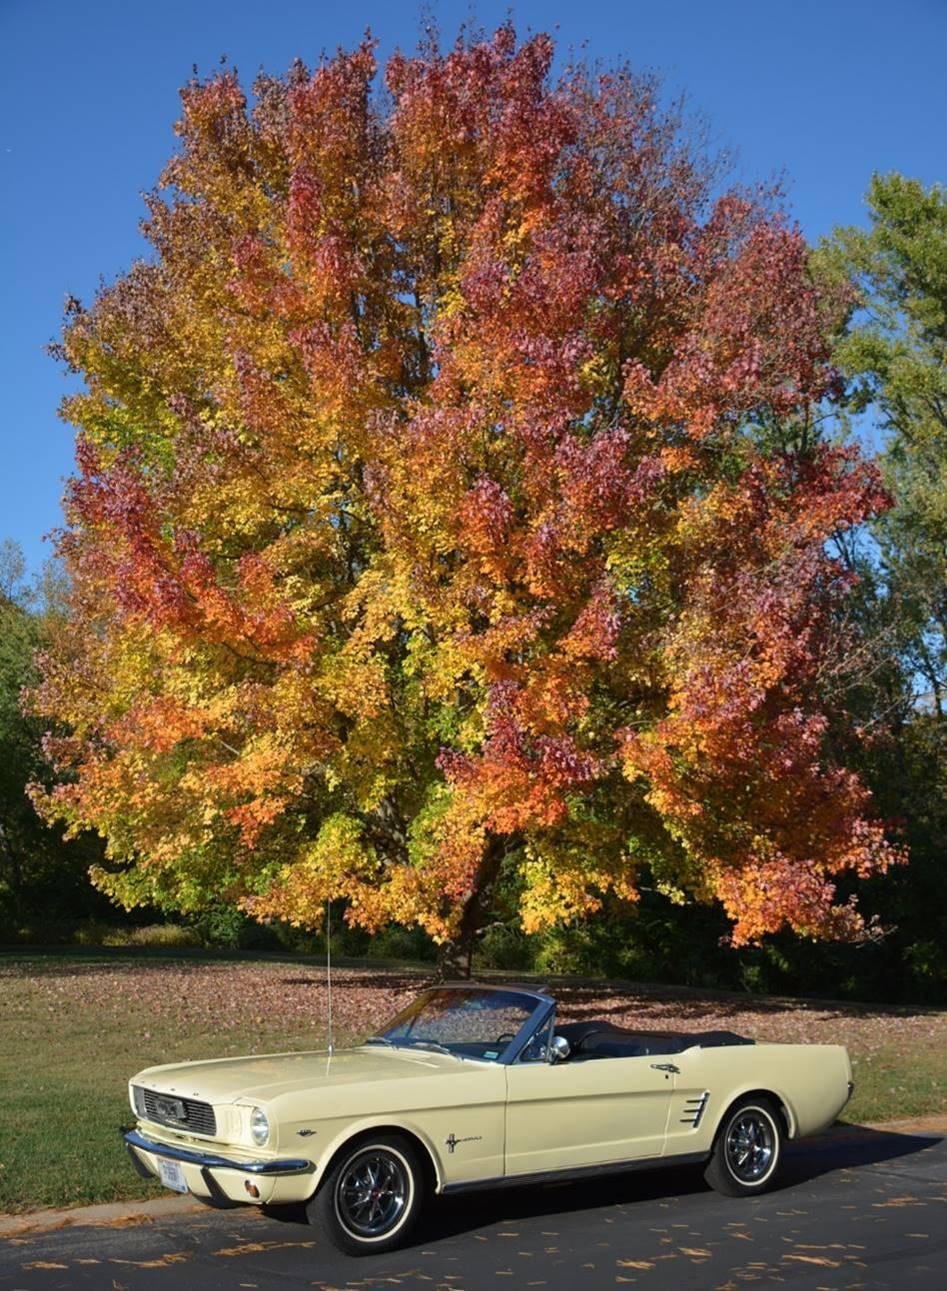 Ford Bronco 🍂 Show me your Fall (Autumn) Photos! I’ll start. Mustang - Fall 2020